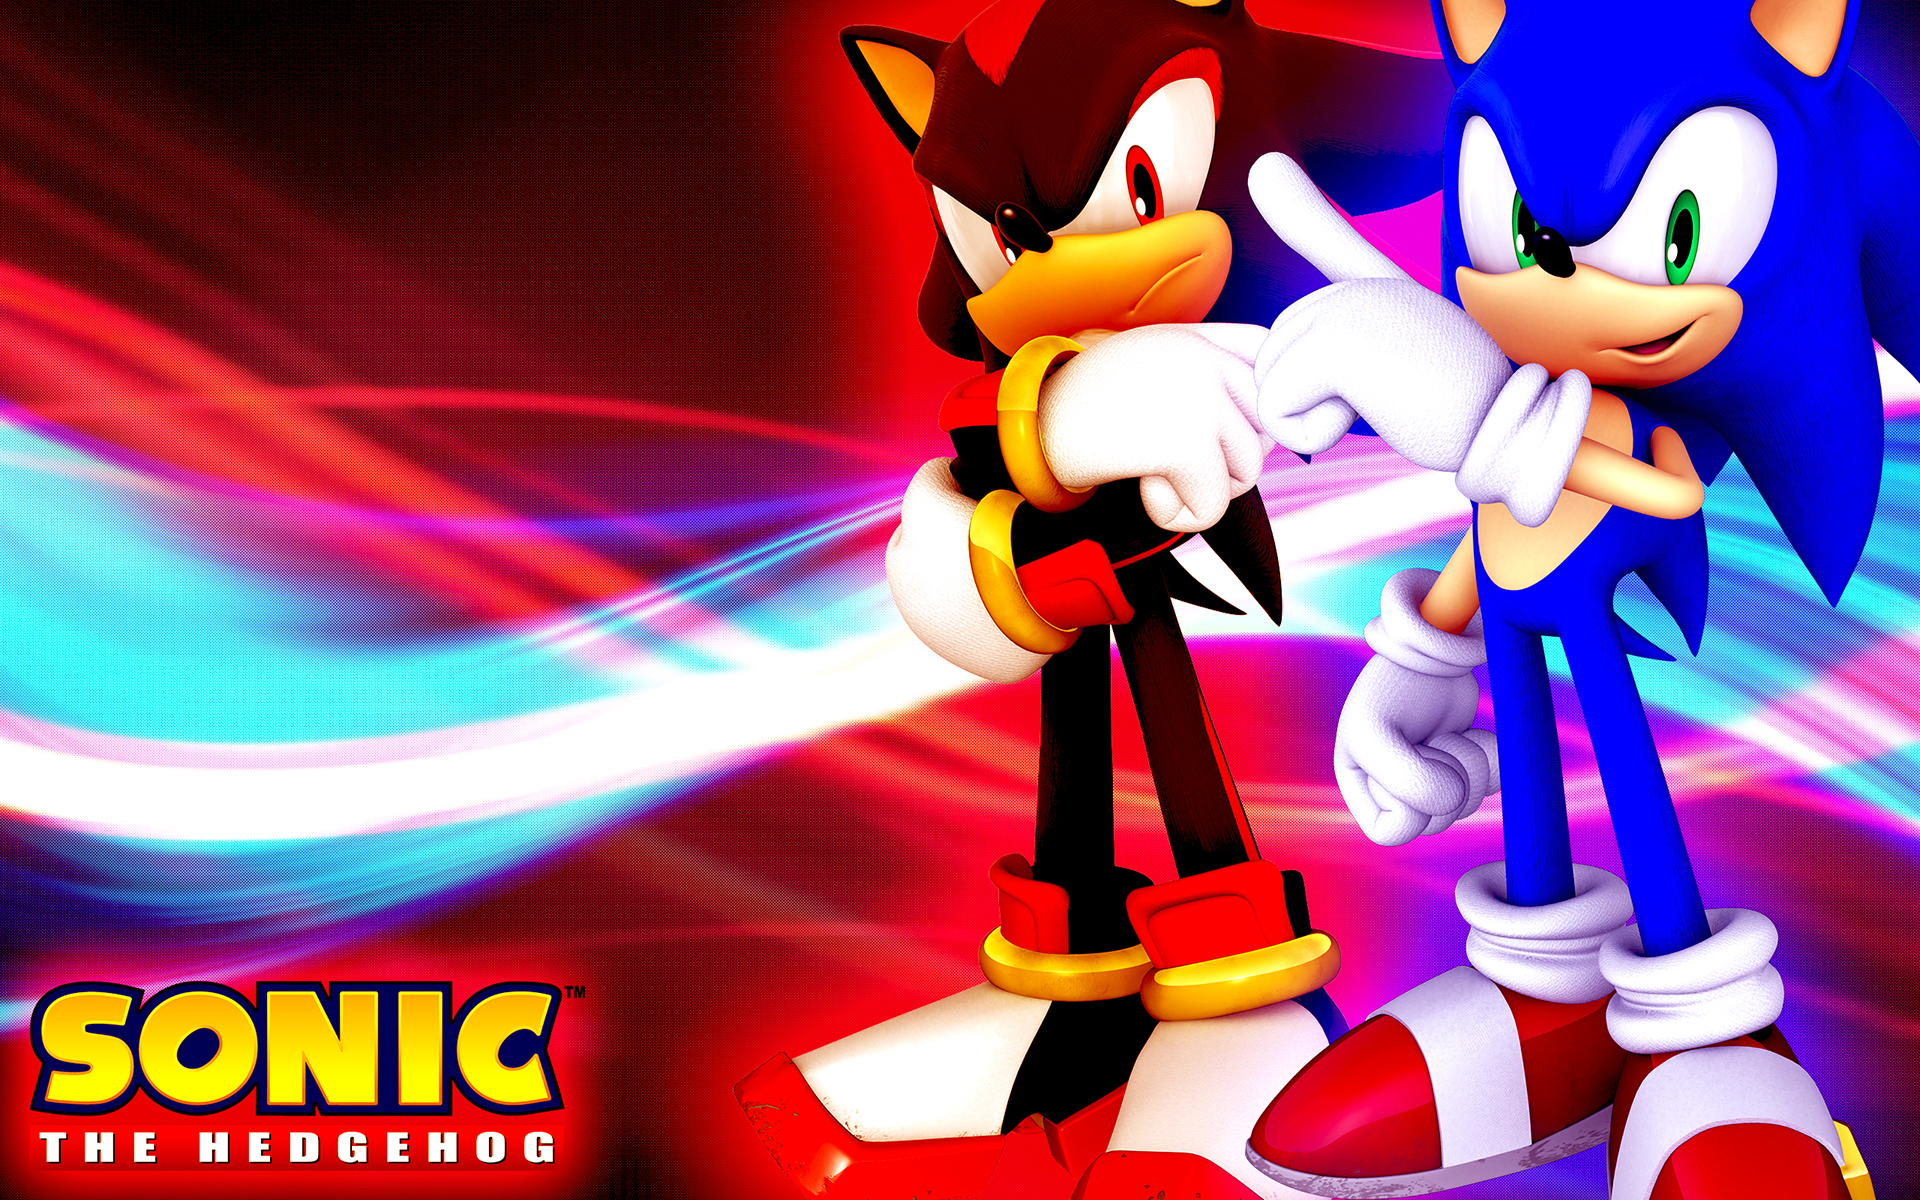 Sonic And Shadow Wallpaper by SonicTheHedgehogBG on